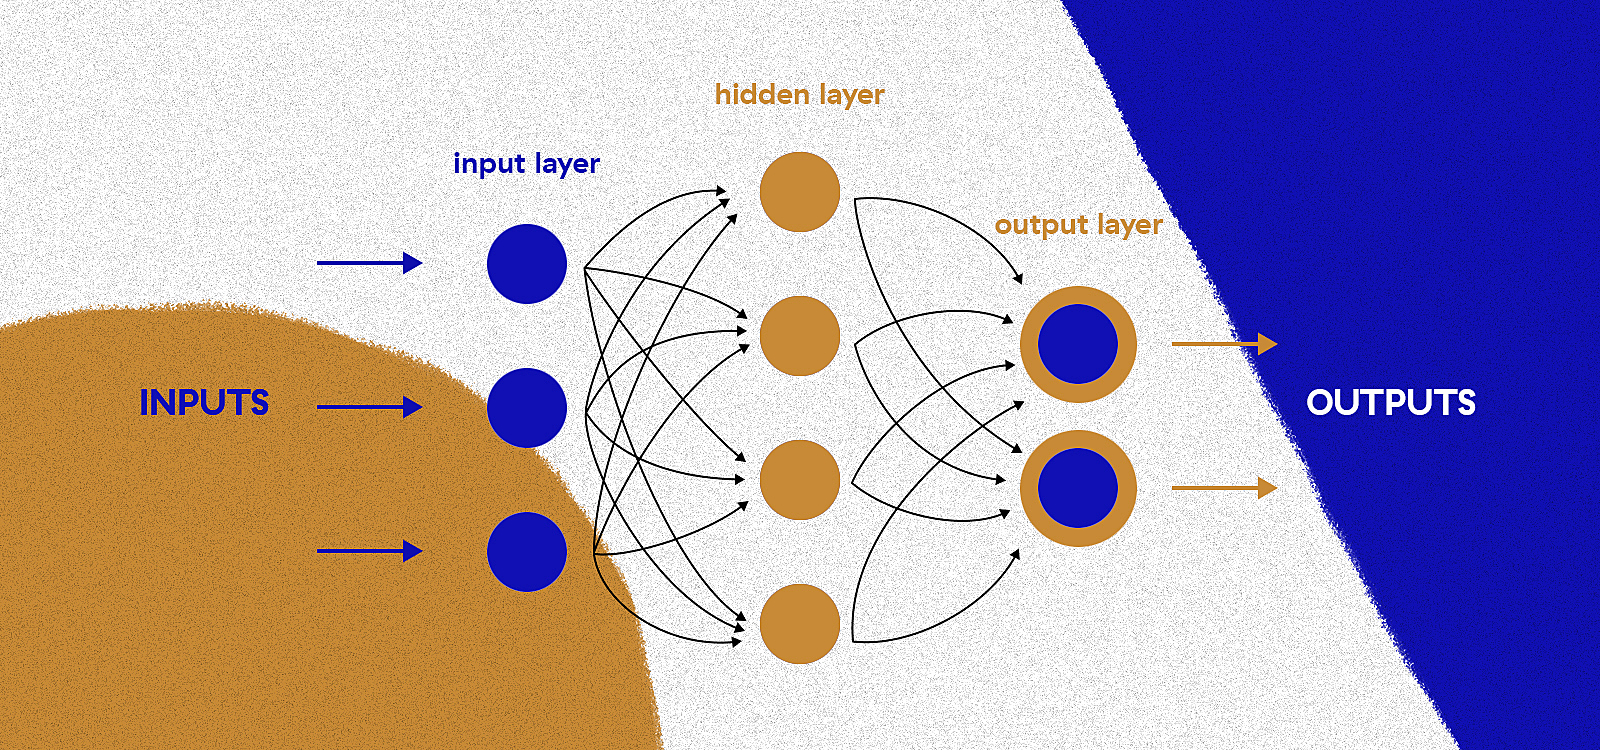 Deep neural networks can find patterns in the data that a human sometimes cannot see.